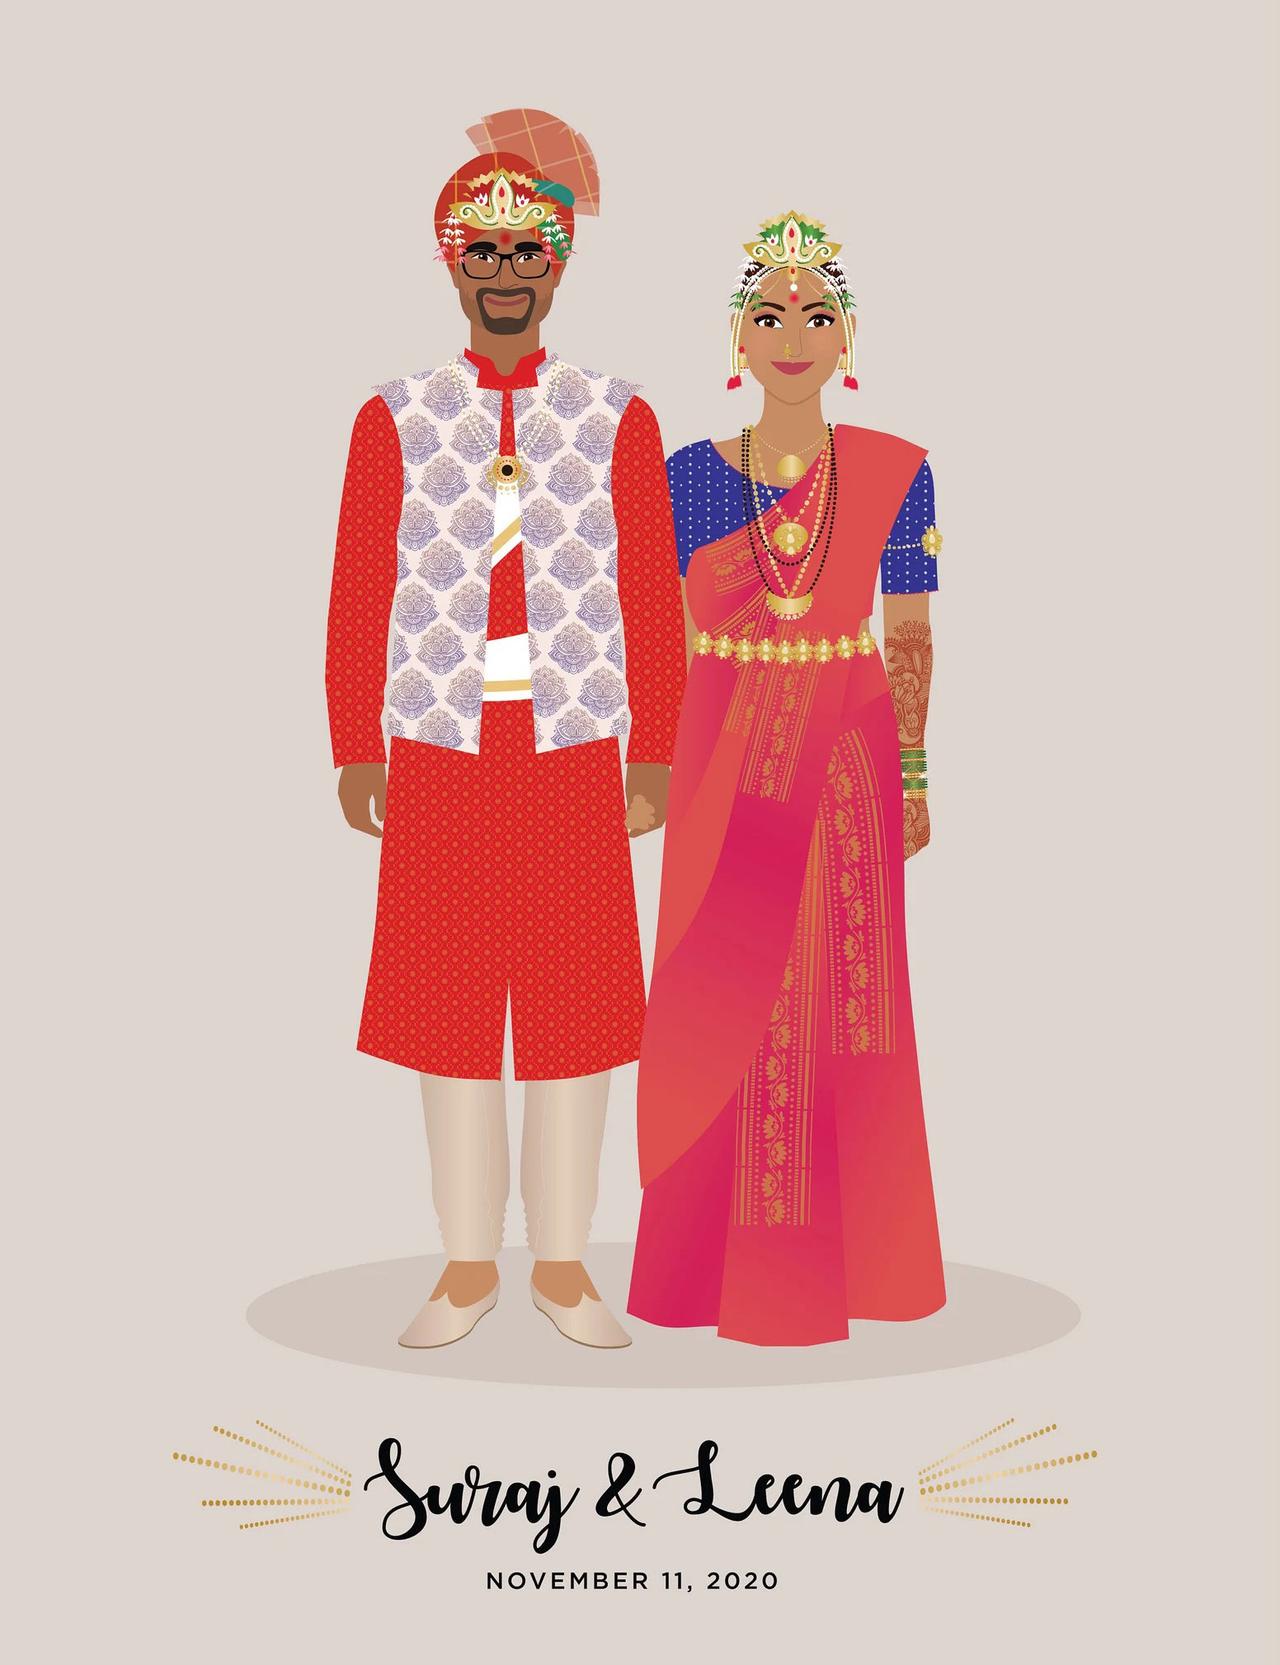 Illustrated portrait of couple on their wedding day in traditional cultural attire